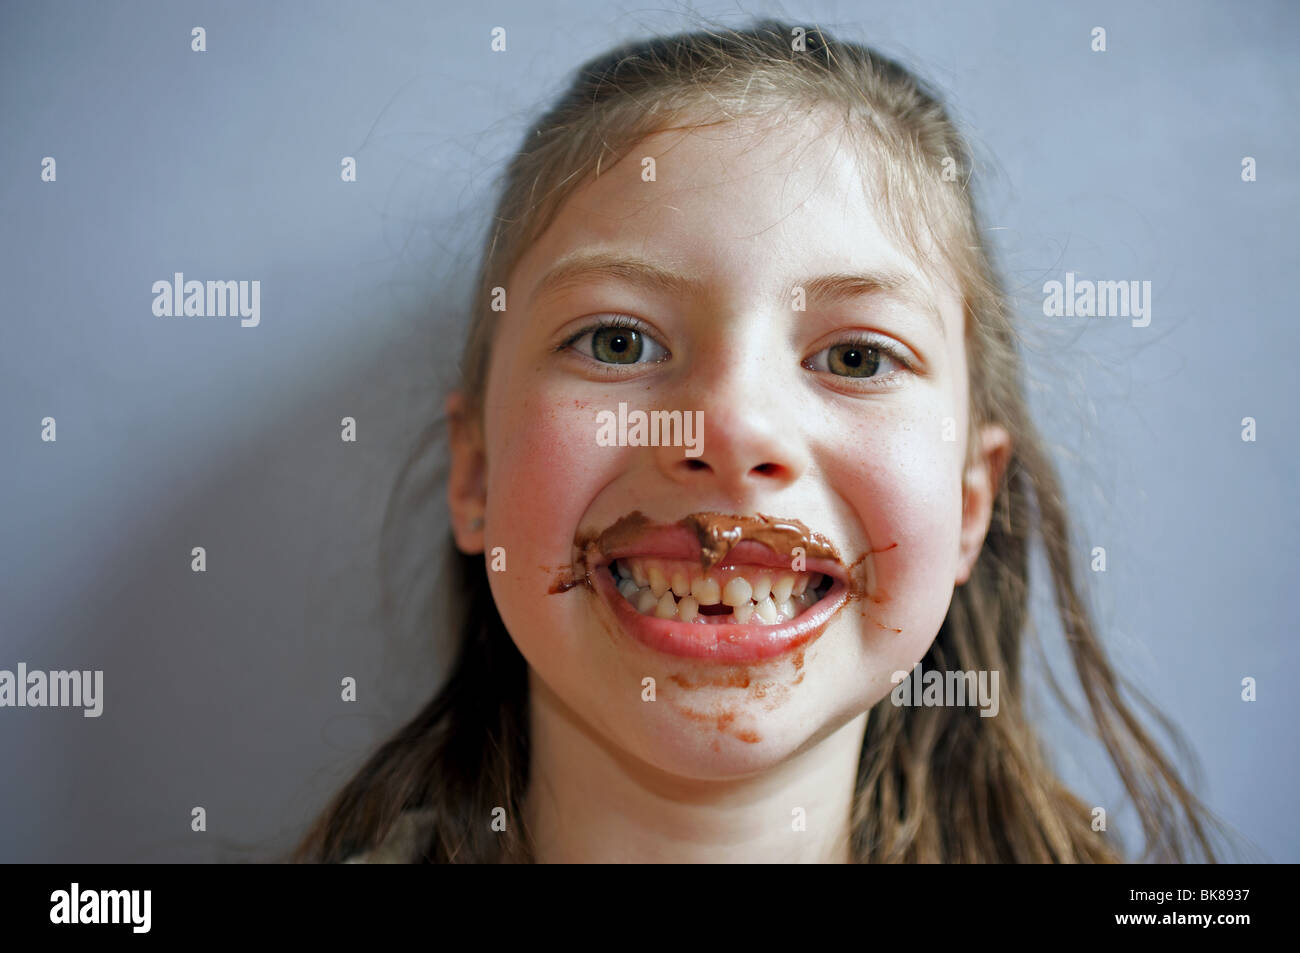 Young girl with face and mouth covered in chocolate Stock Photo